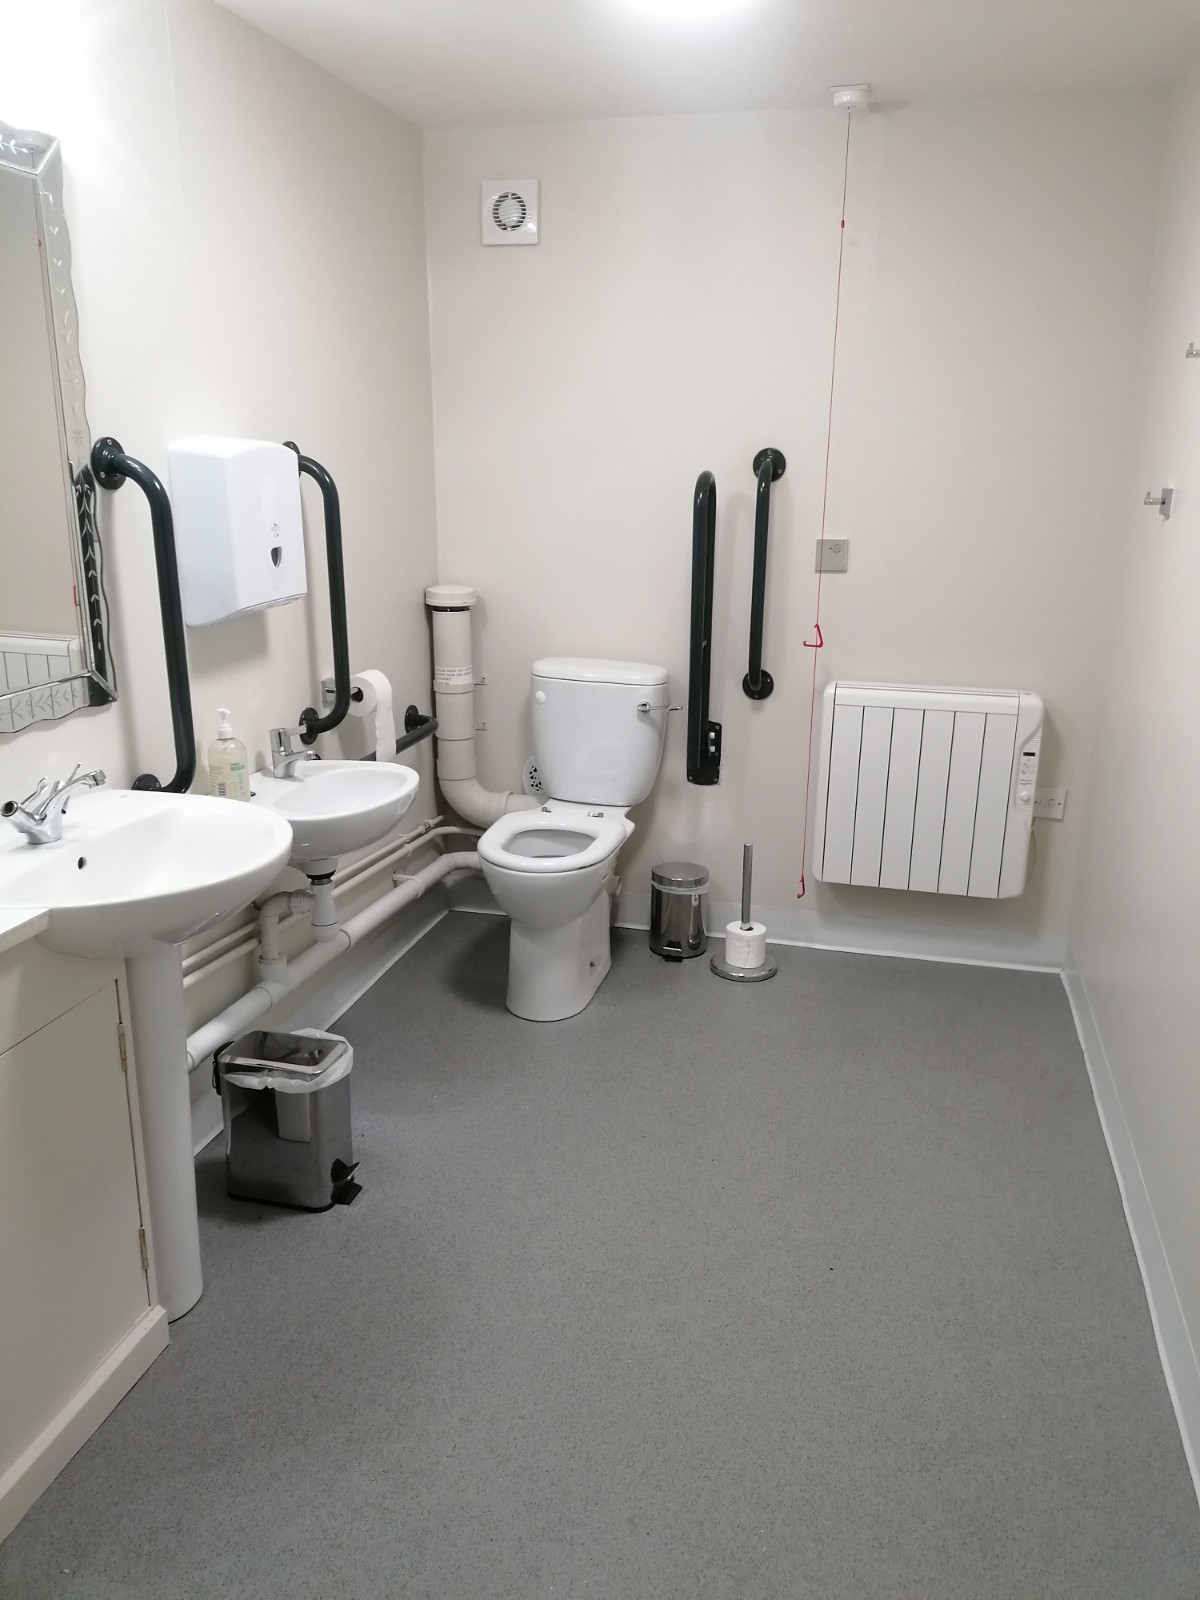 Accessible Cloakroom